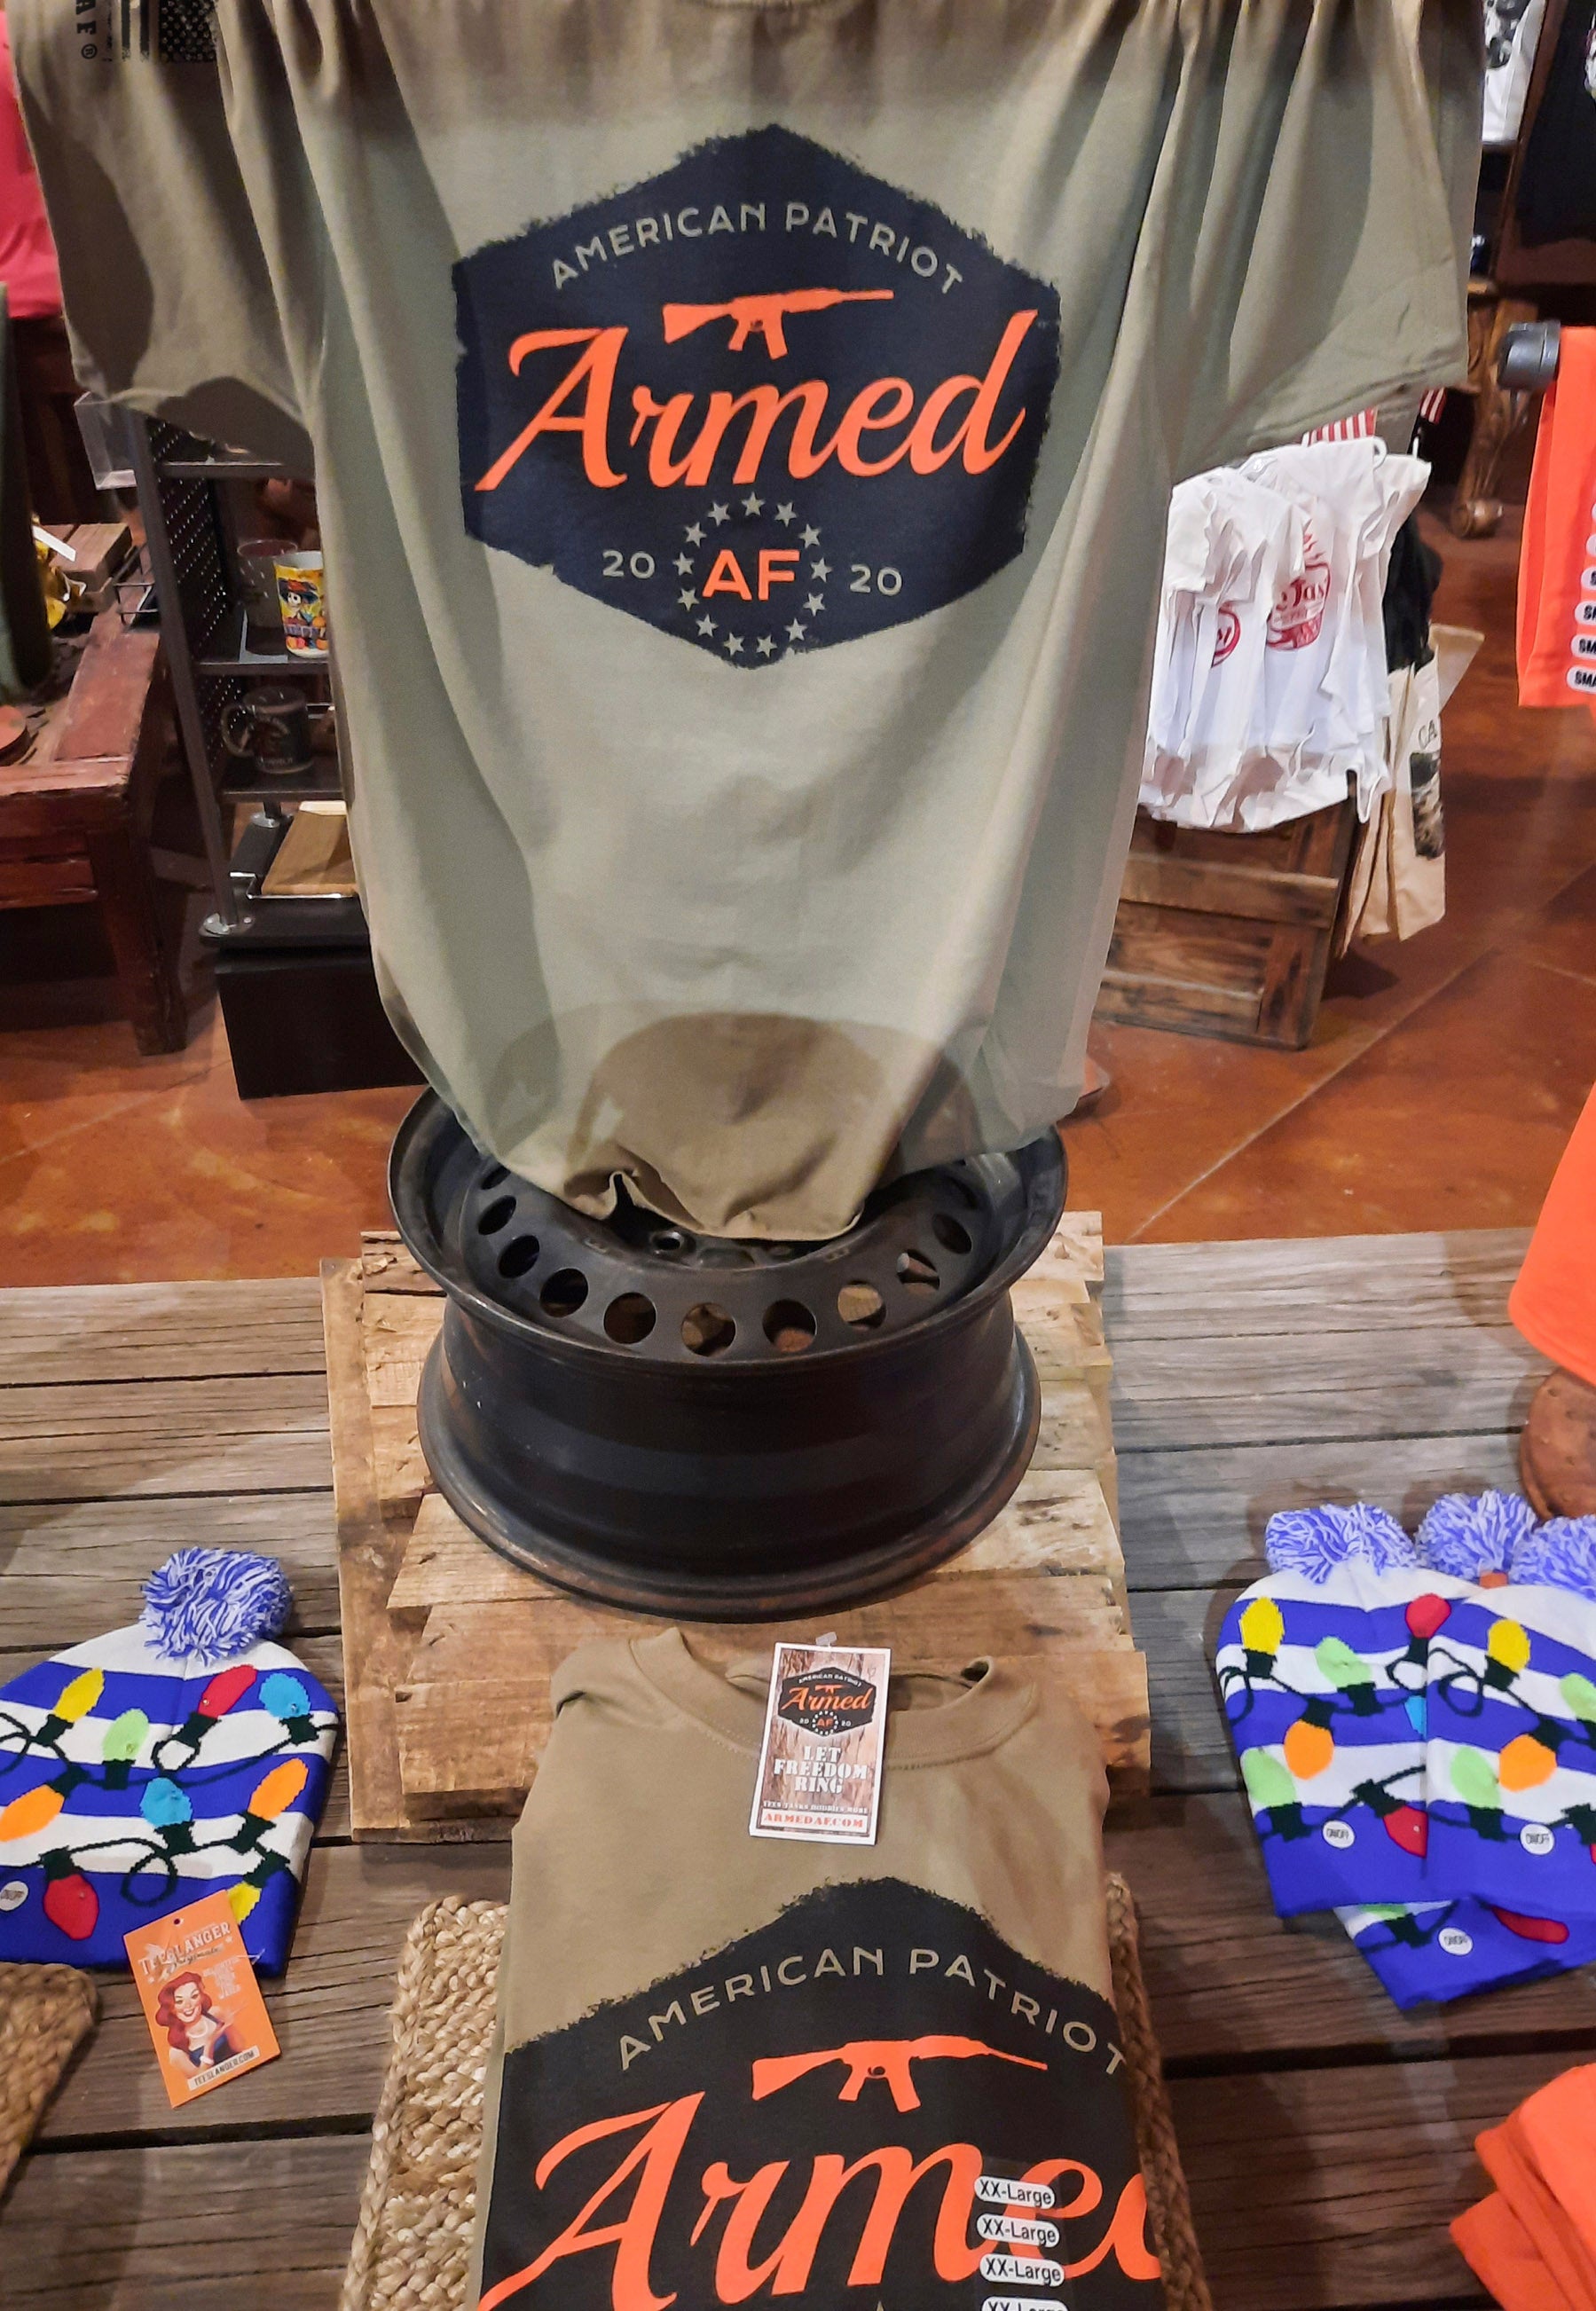 ArmedAF® logo t-shirt for sale in store